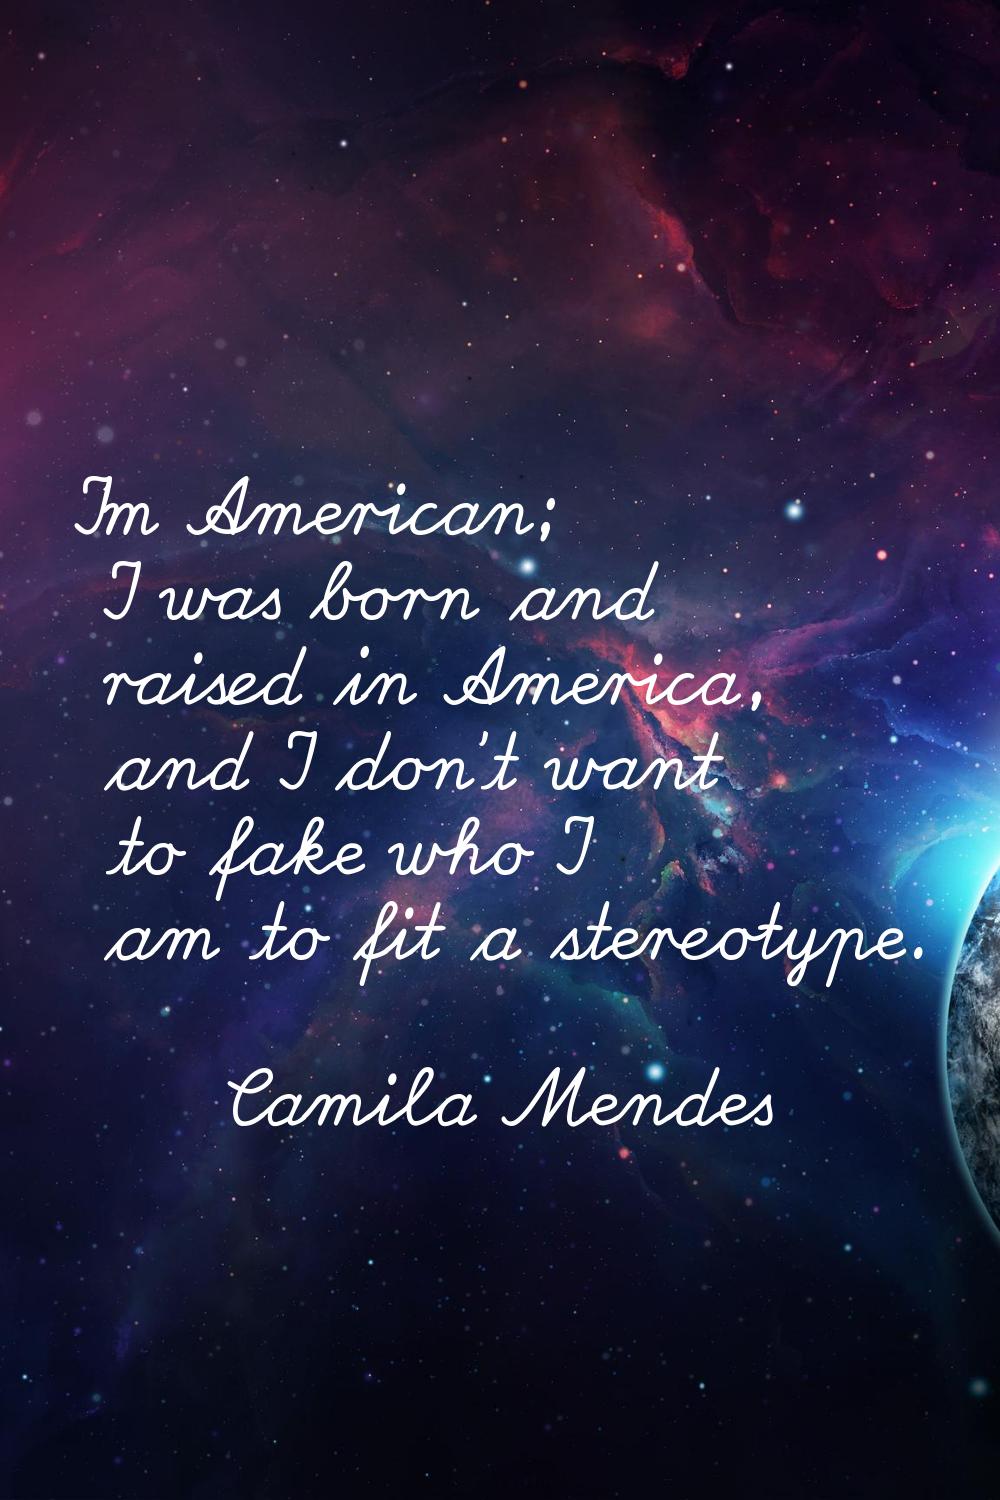 I'm American; I was born and raised in America, and I don't want to fake who I am to fit a stereoty